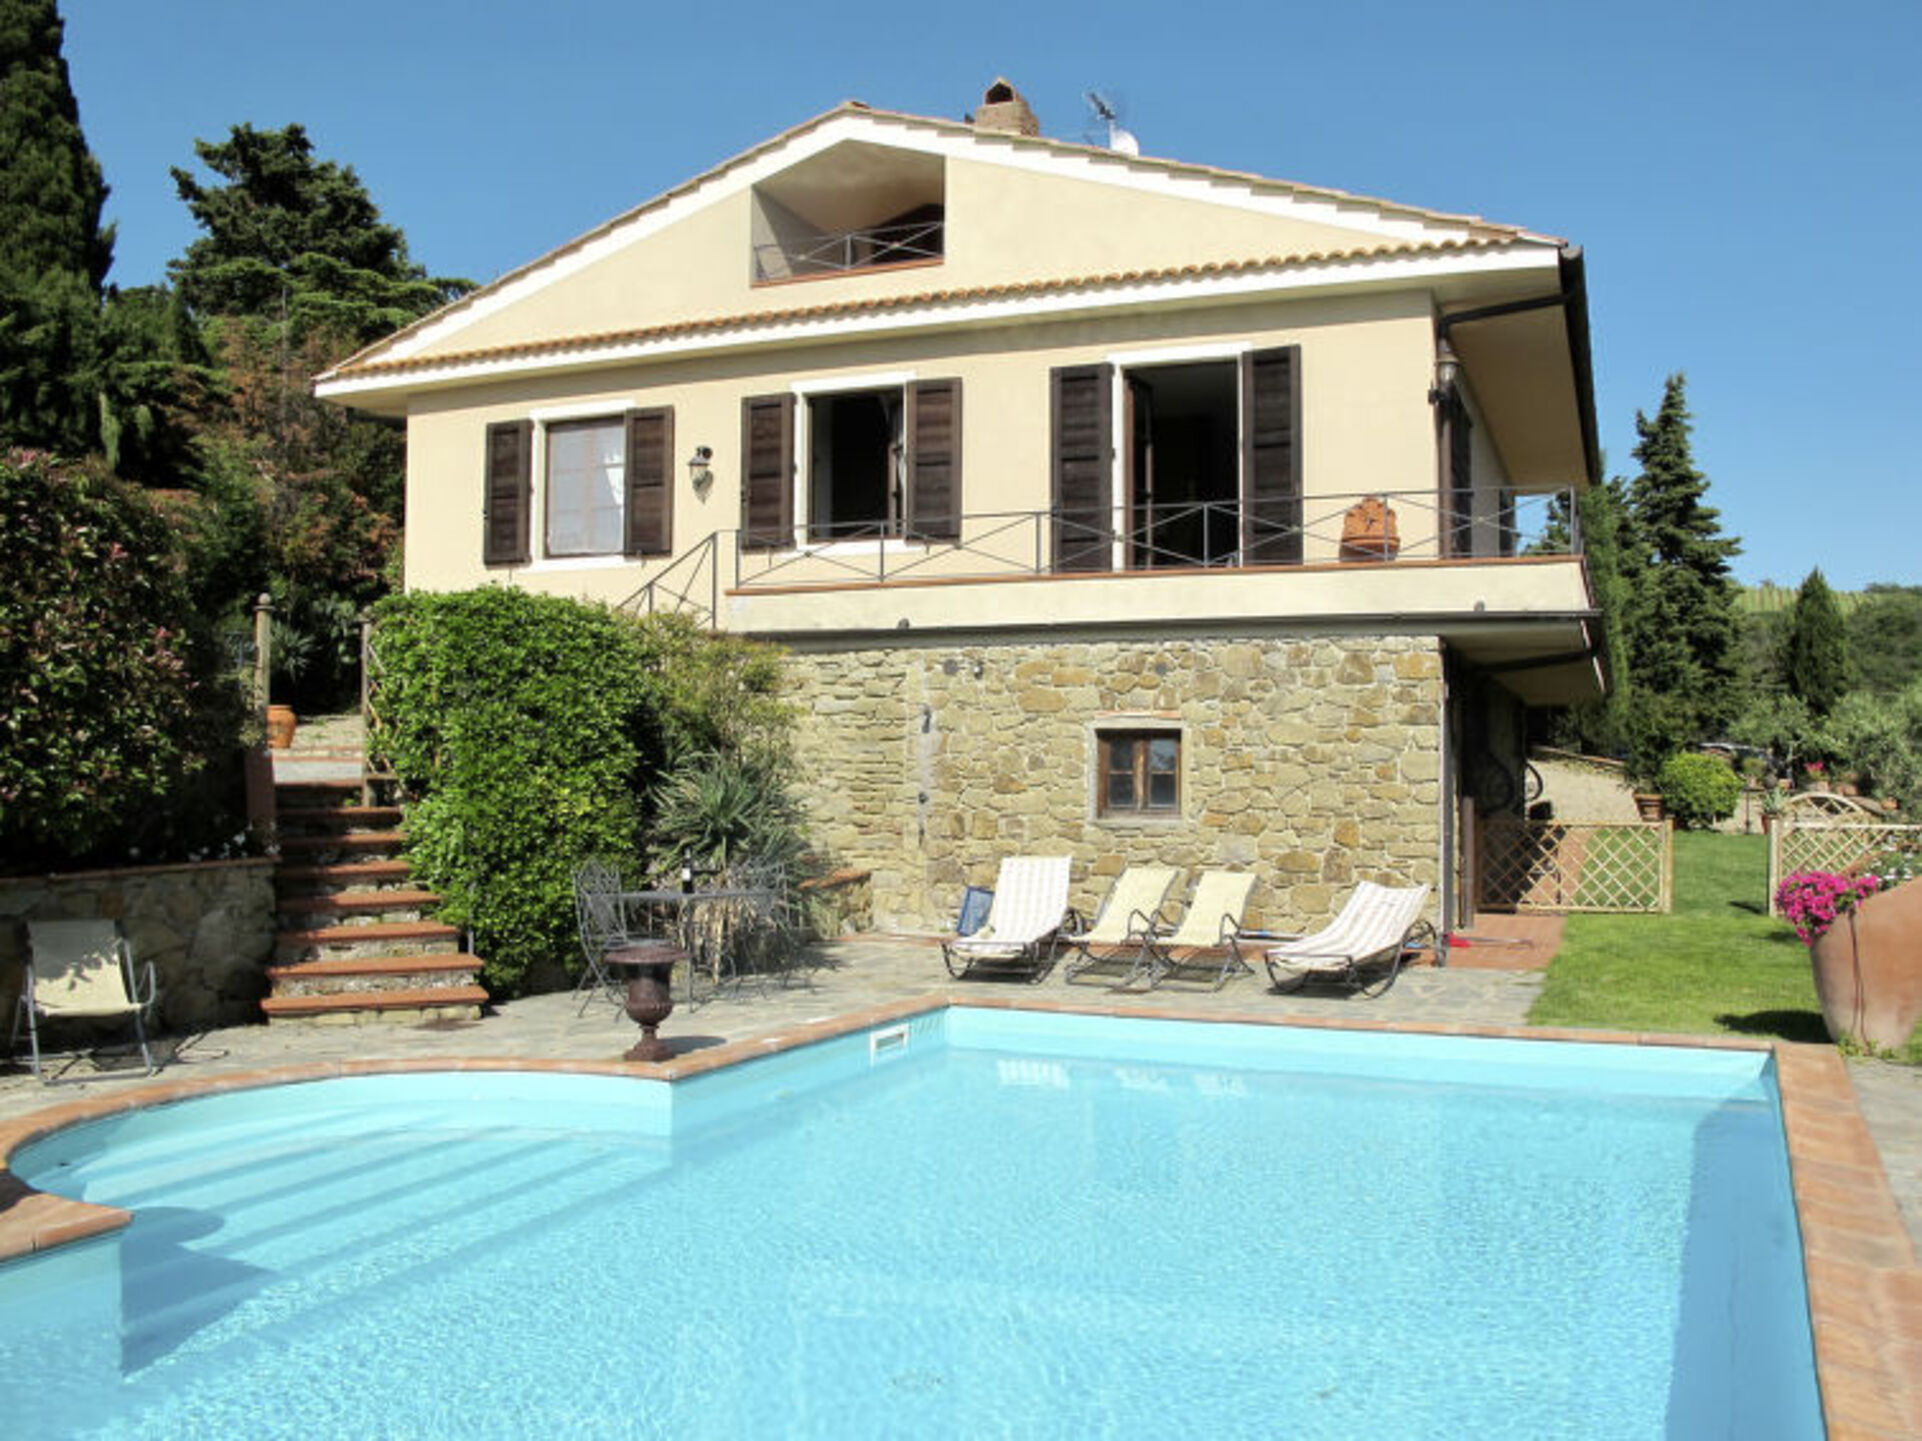 Property Image 2 - The Ultimate Villa in an Ideal Location, Tuscany Villa 1158